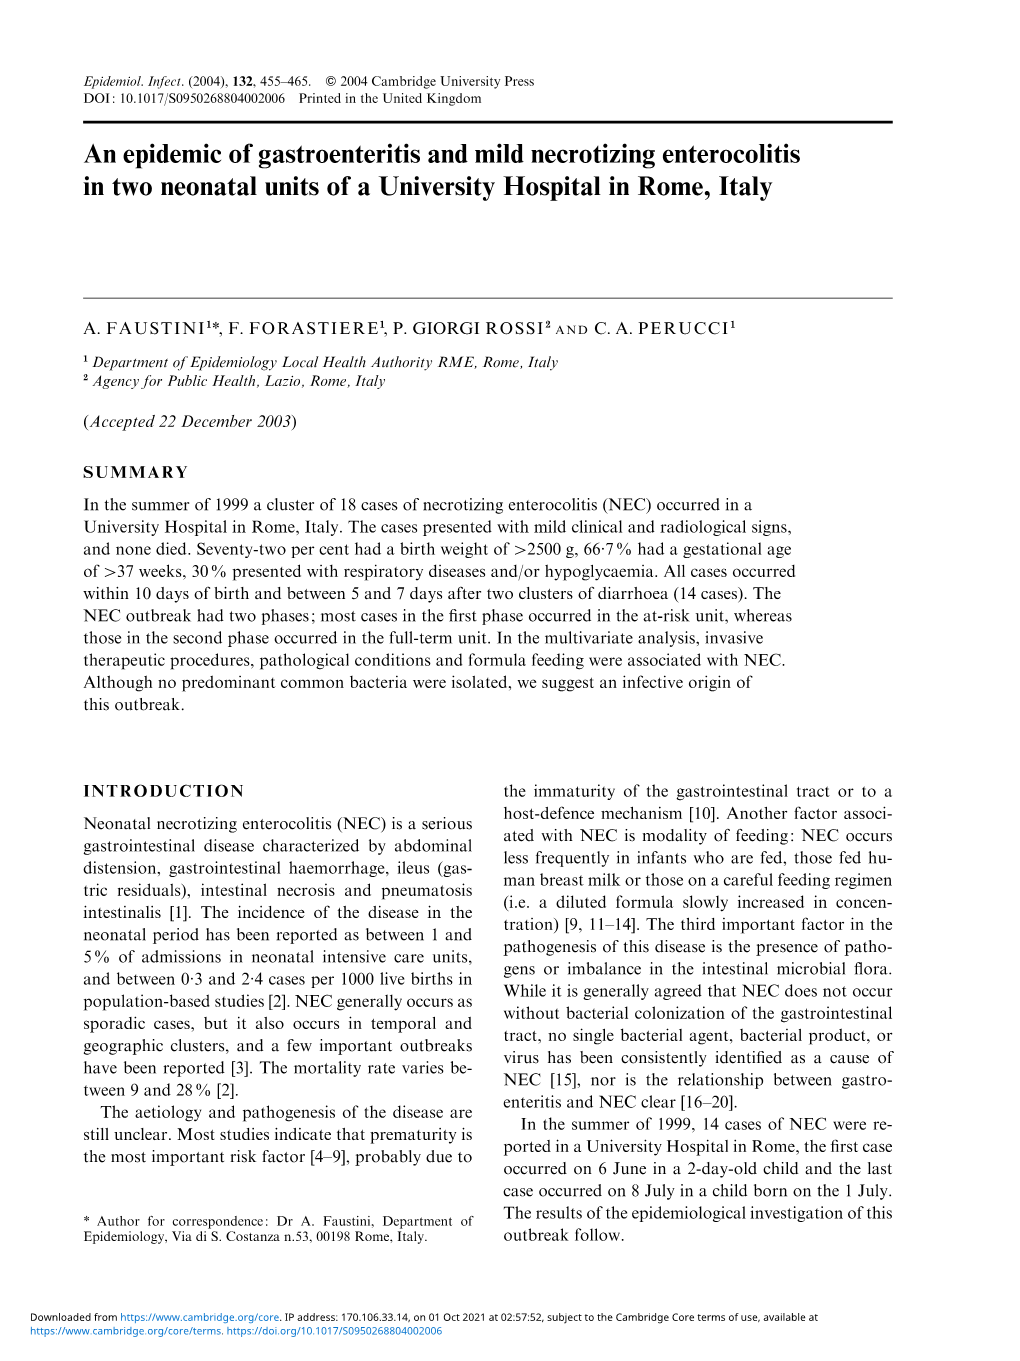 An Epidemic of Gastroenteritis and Mild Necrotizing Enterocolitis in Two Neonatal Units of a University Hospital in Rome, Italy